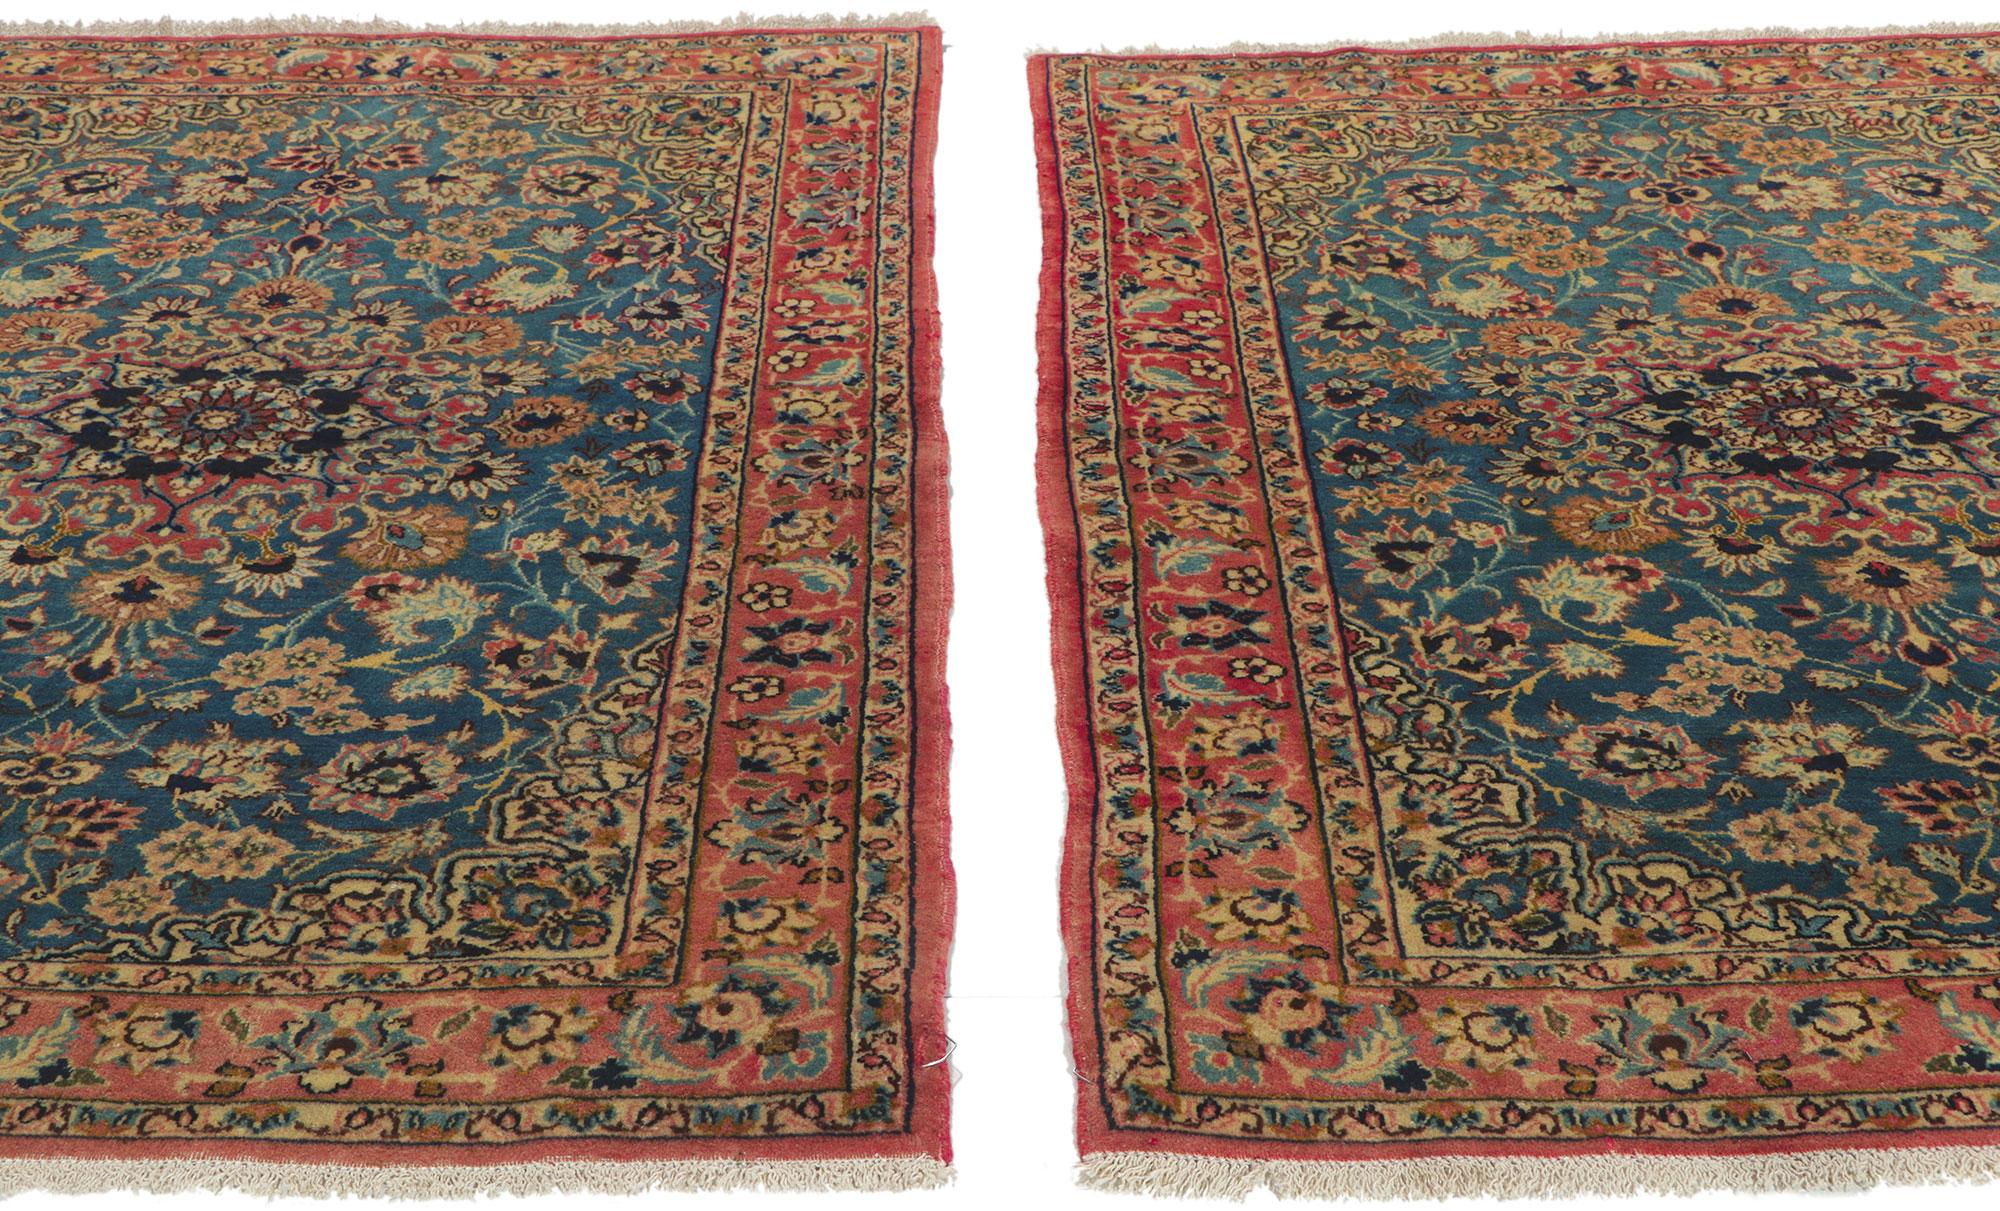 Pair of matching vintage Persian Isfahan rugs
With its timeless style, incredible detail and texture, this pair of hand knotted wool vintage Persian Isfahan rugs are a captivating vision of woven beauty. The eye-catching botanical pattern and